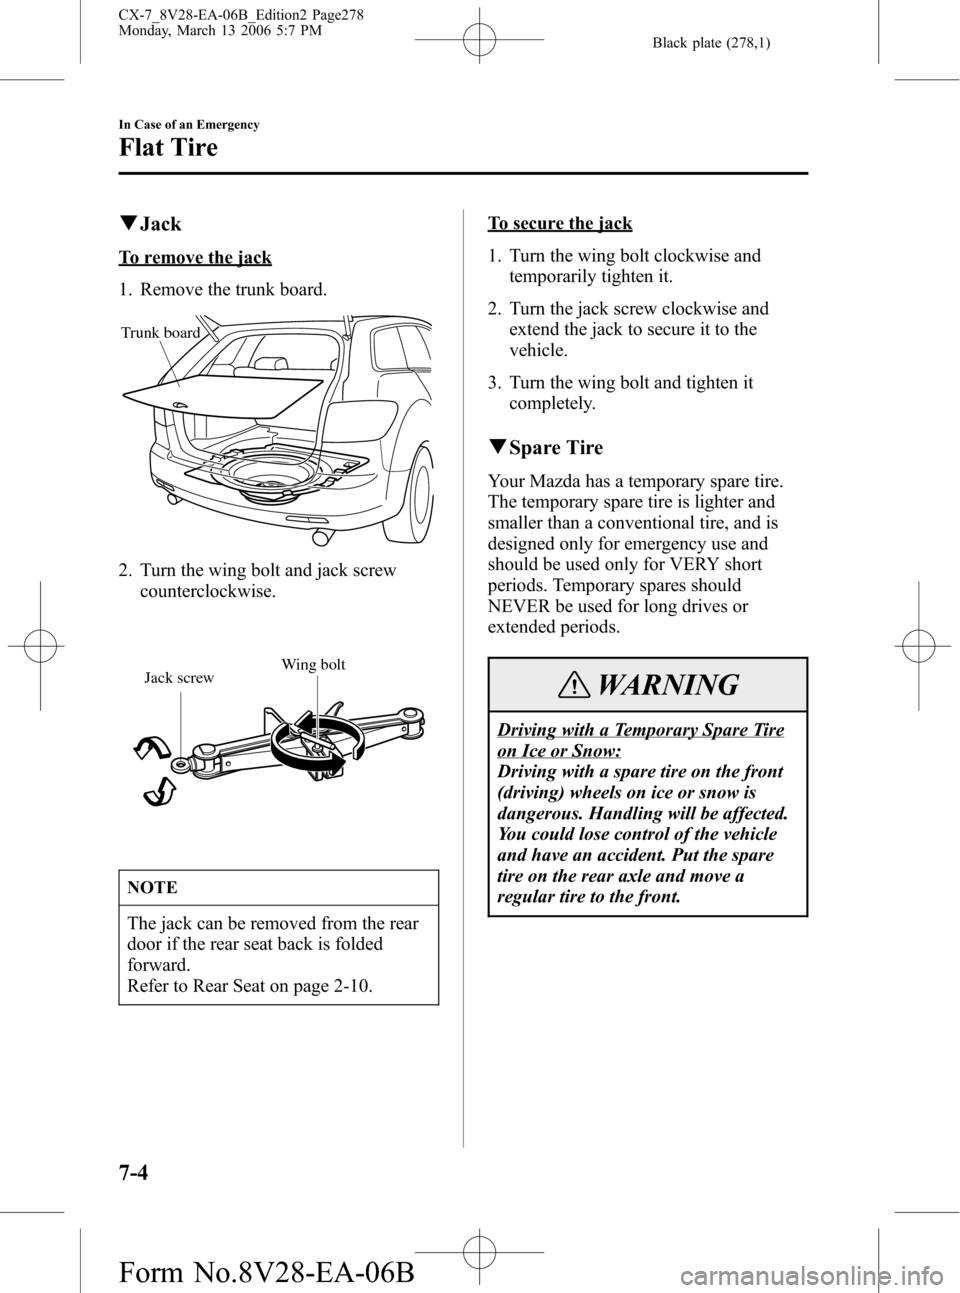 MAZDA MODEL CX-7 2007  Owners Manual (in English) Black plate (278,1)
qJack
To remove the jack
1. Remove the trunk board.
Trunk board
2. Turn the wing bolt and jack screw
counterclockwise.
Jack screwWing bolt
NOTE
The jack can be removed from the rea